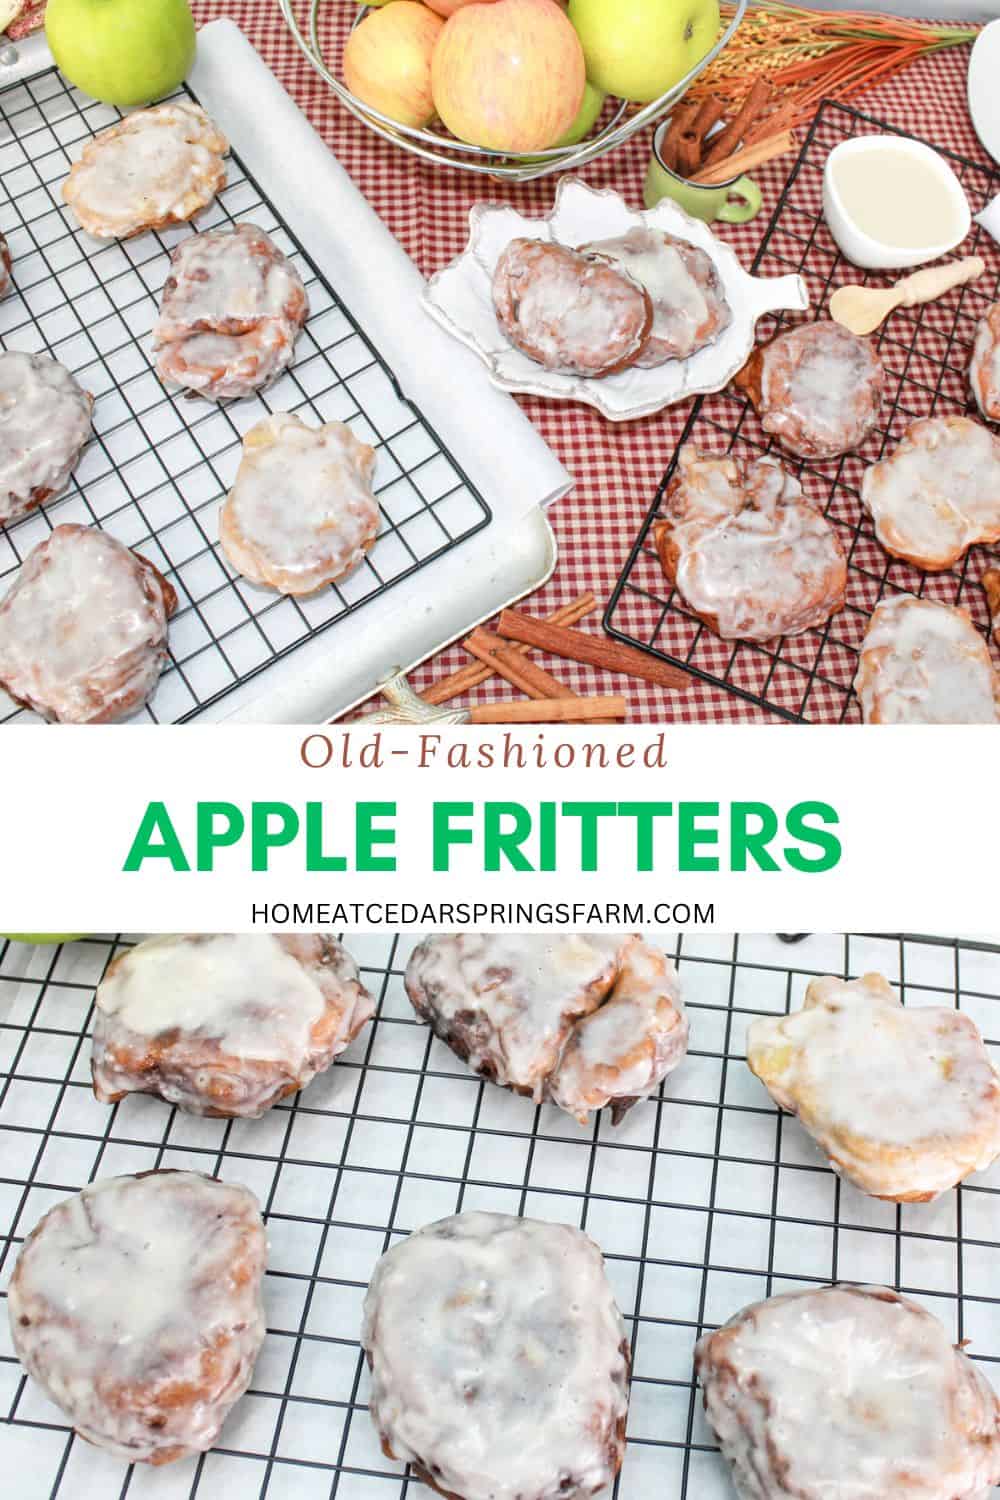 Old Fashioned Apple Fritters on a wire rack with apples and cinnamon sticks in the background with text overlay.